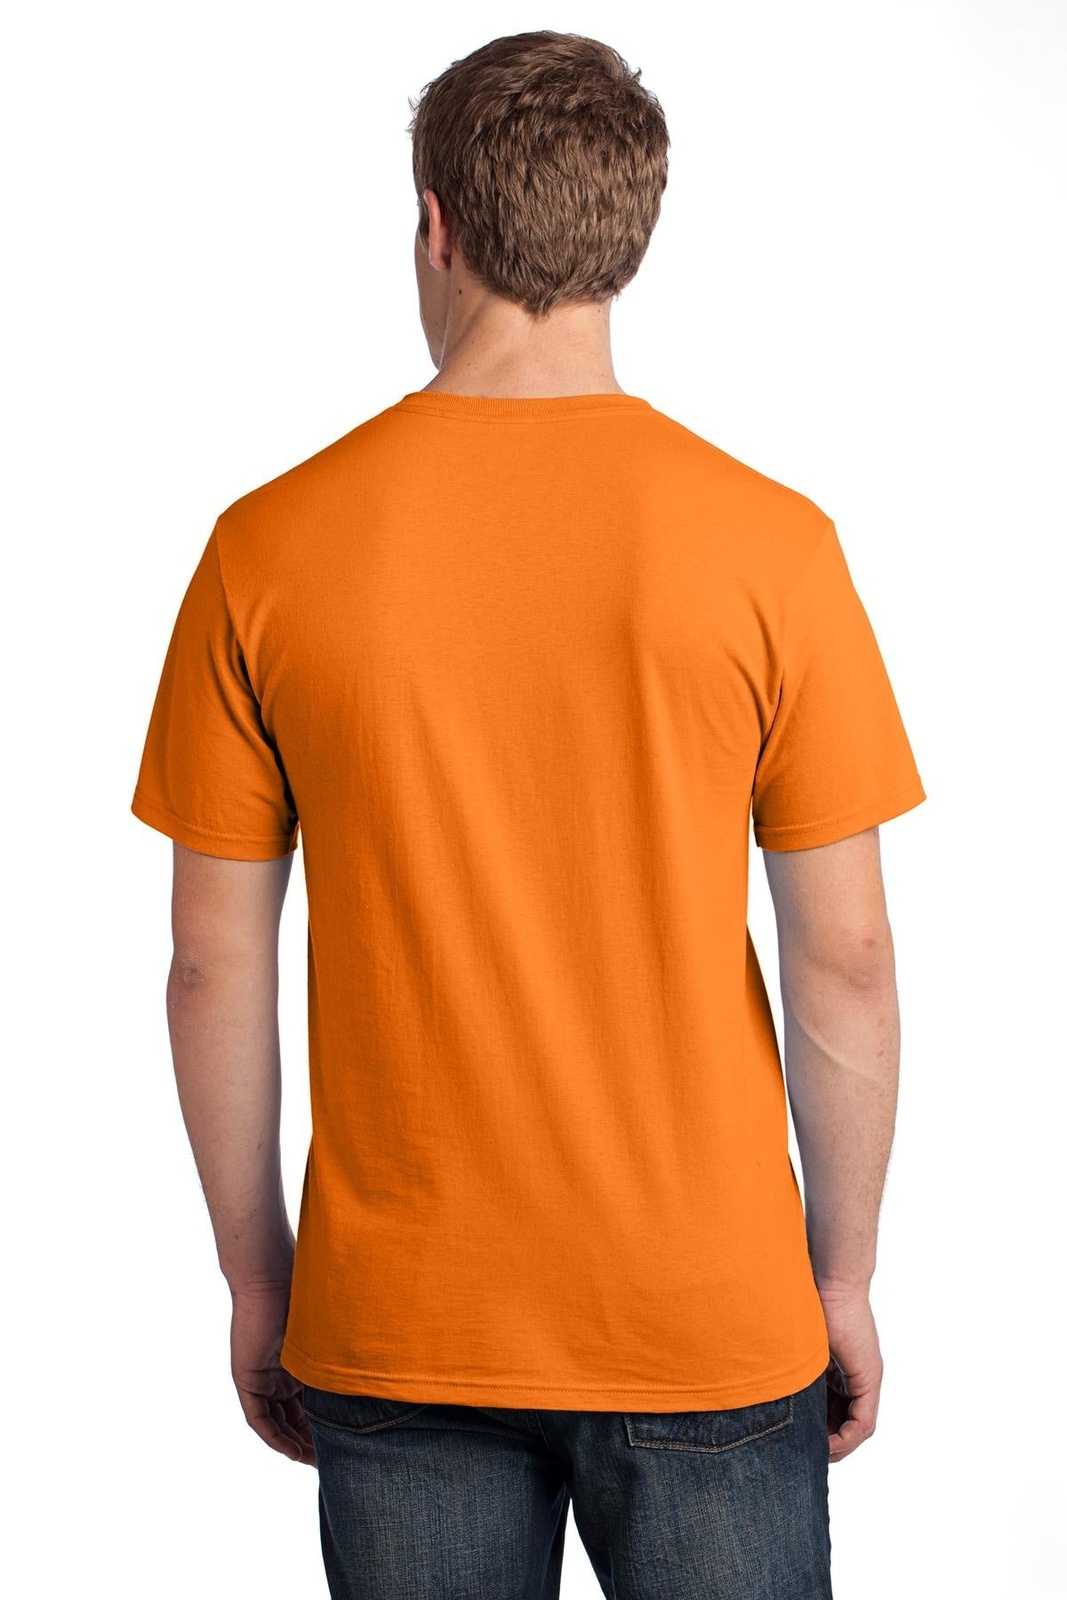 Fruit of the Loom 3930 HD Cotton 100% Cotton T-Shirt - Tennessee Orange - HIT a Double